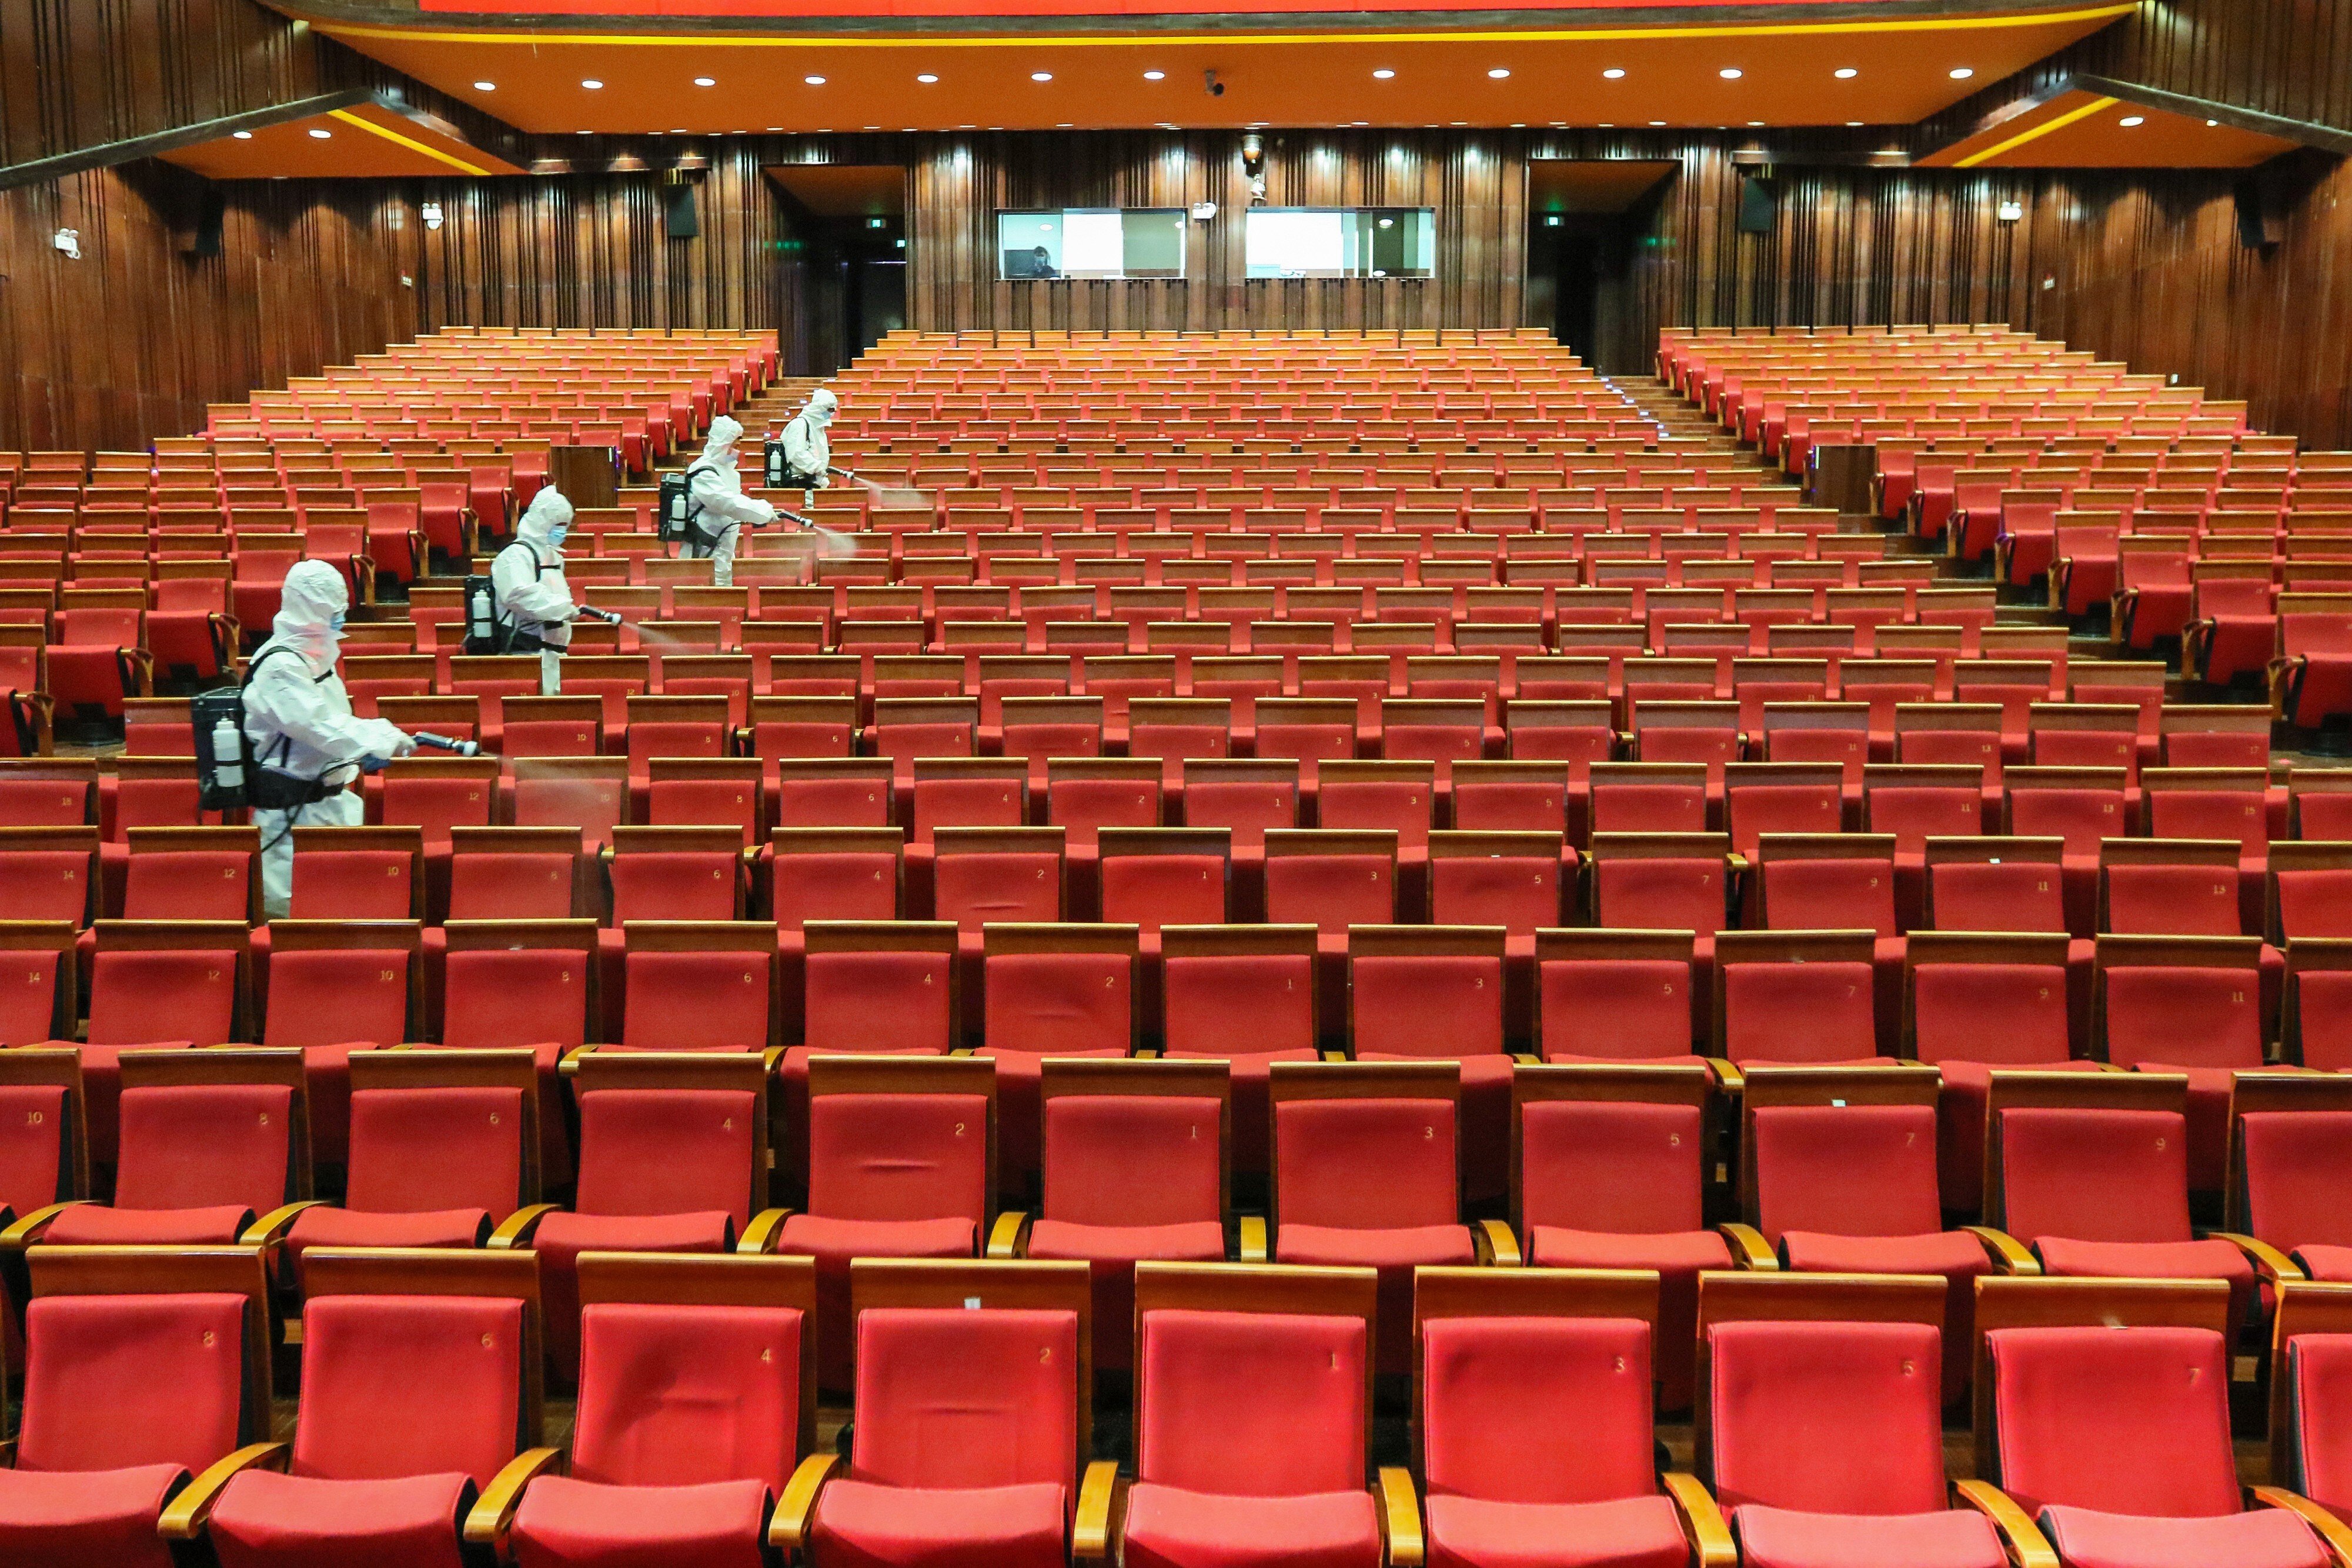 Staff members spray disinfectant at a theatre on May 12 as it prepares to reopen in Yantai, a city in China's eastern Shandong province. Photo: AFP